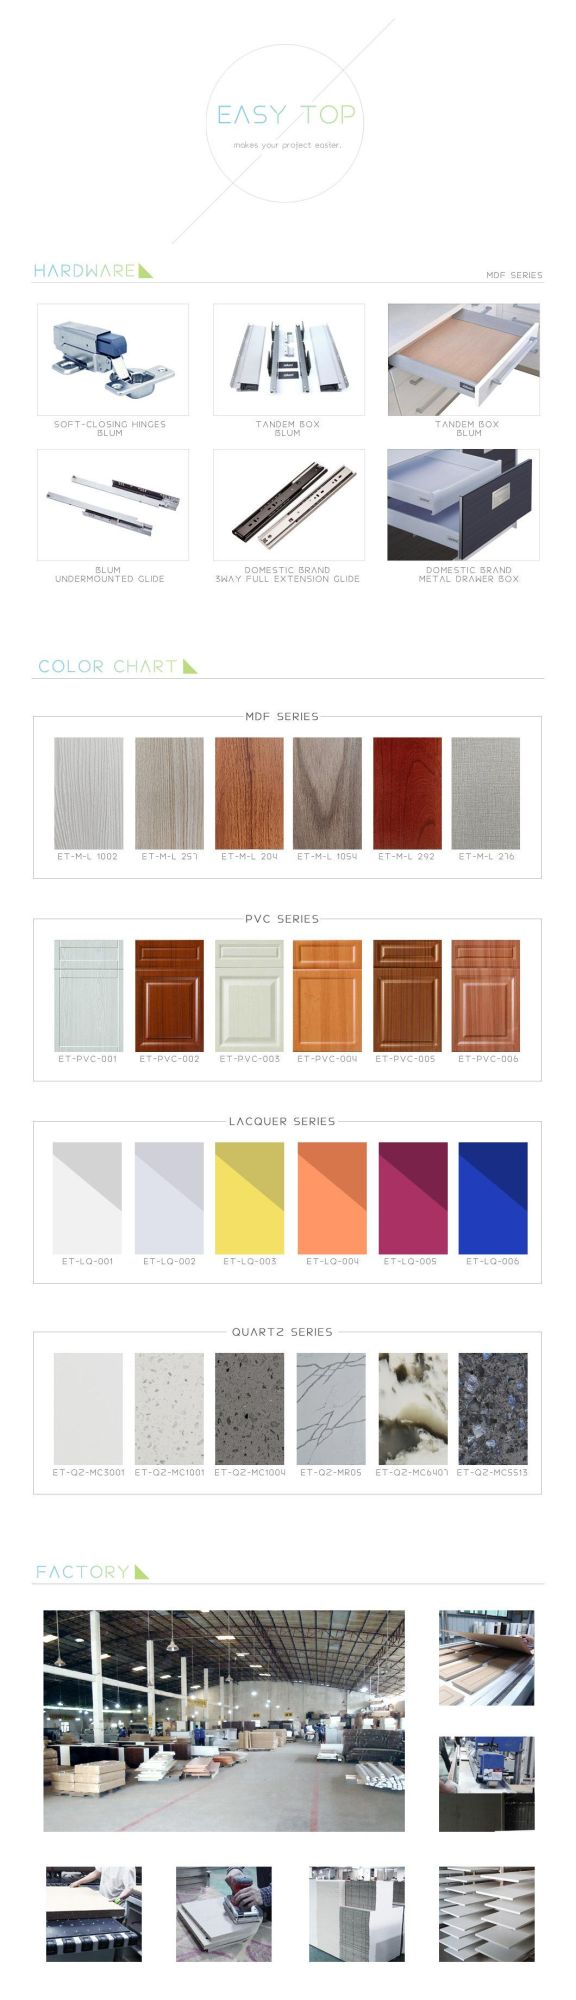 Modern Customized Furniture Lacquer Pantry Kitchen Cabinets Guangzhou with Dtc Blum Hardware